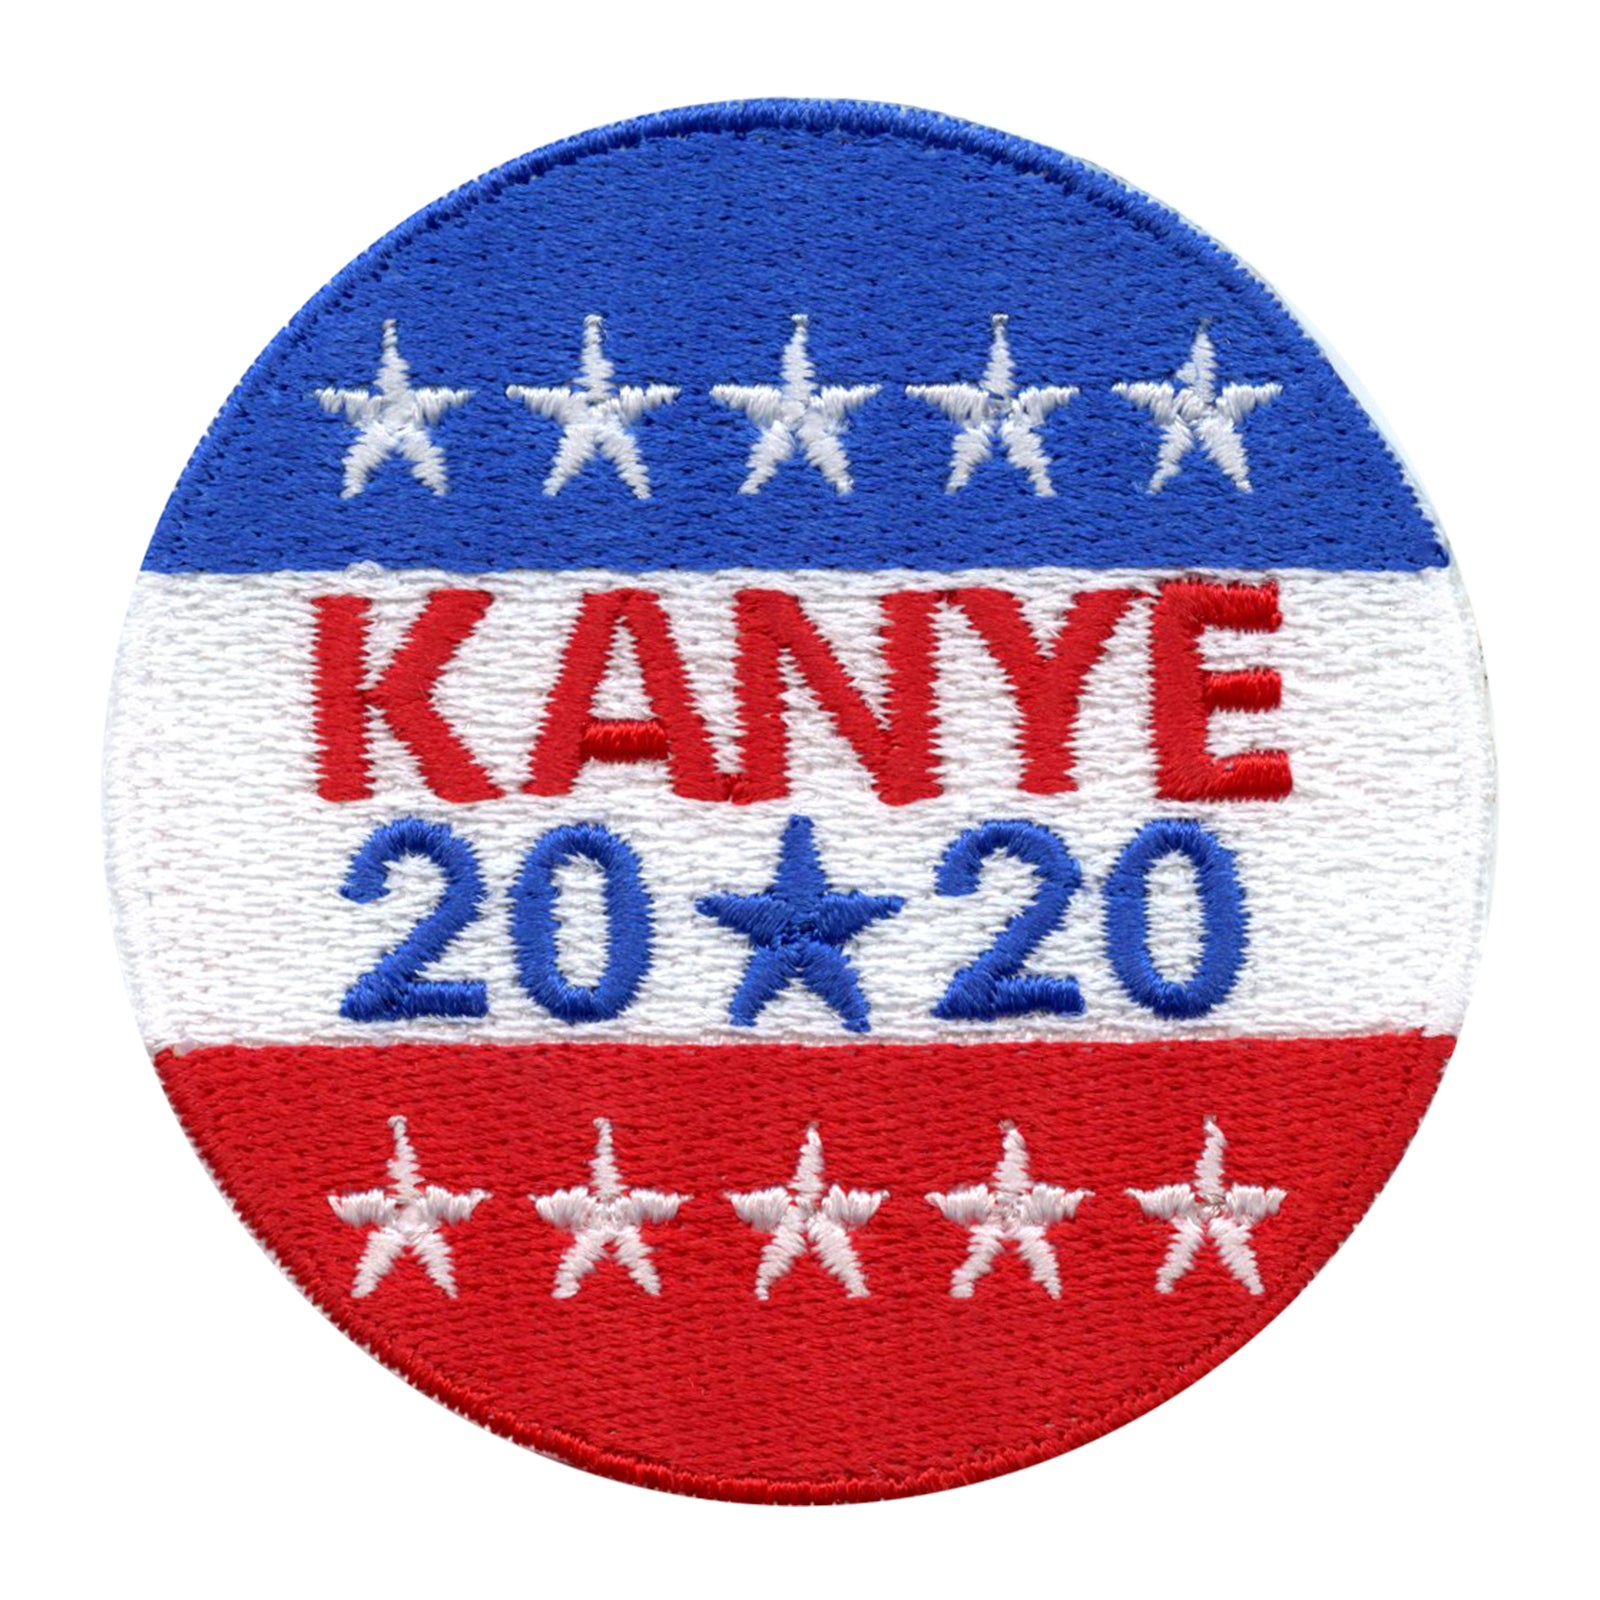 Kanye 2020 For United States President Round Embroidered Iron On Patch 